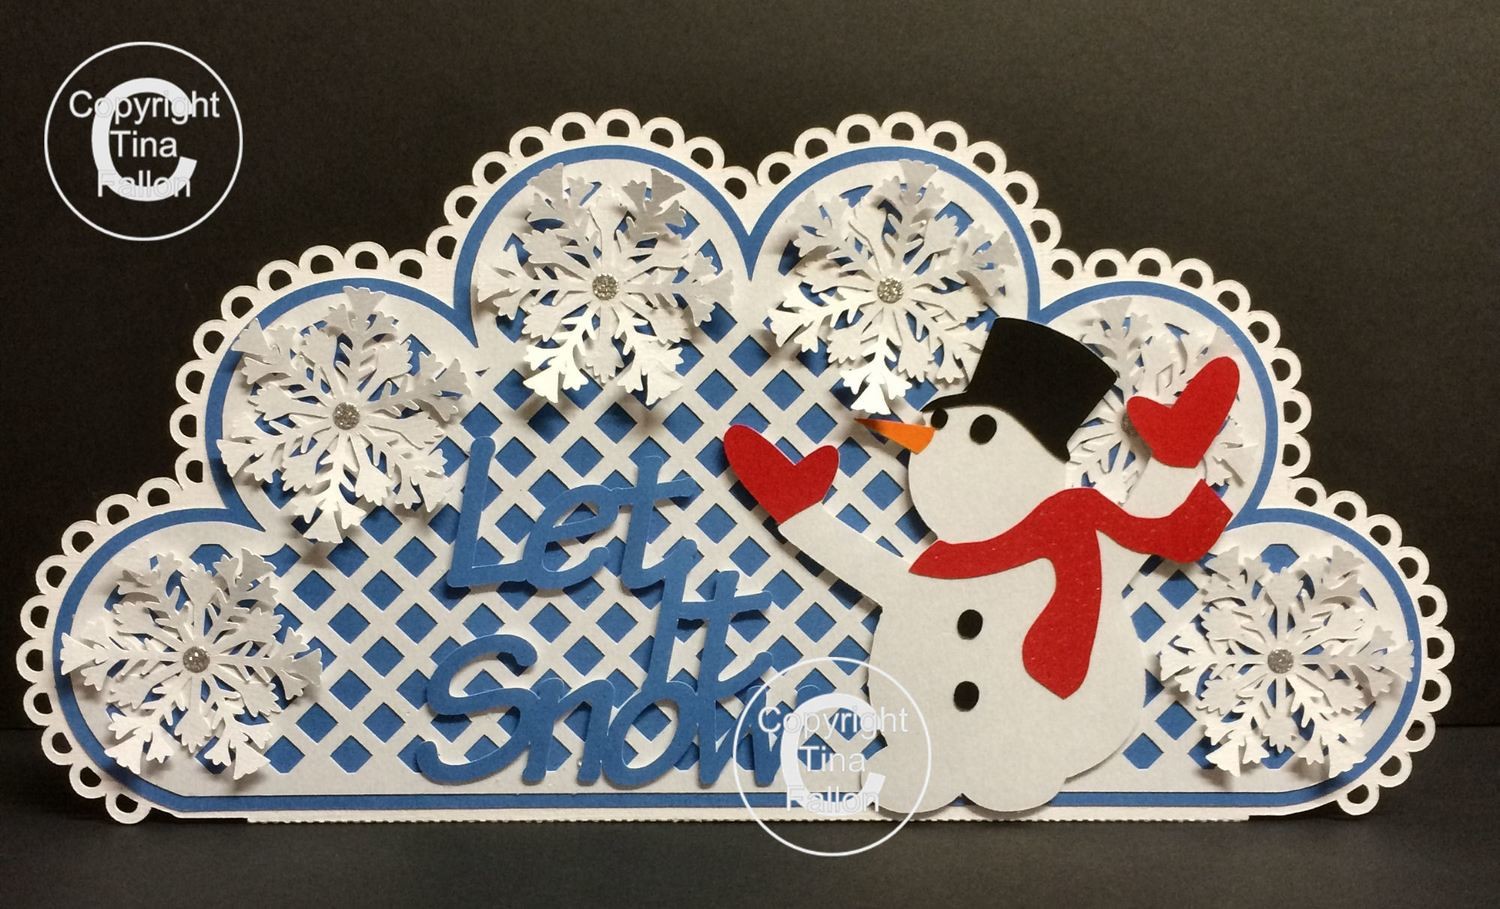 Frozen Snowflake Christmas Card Let It Snow with snowman